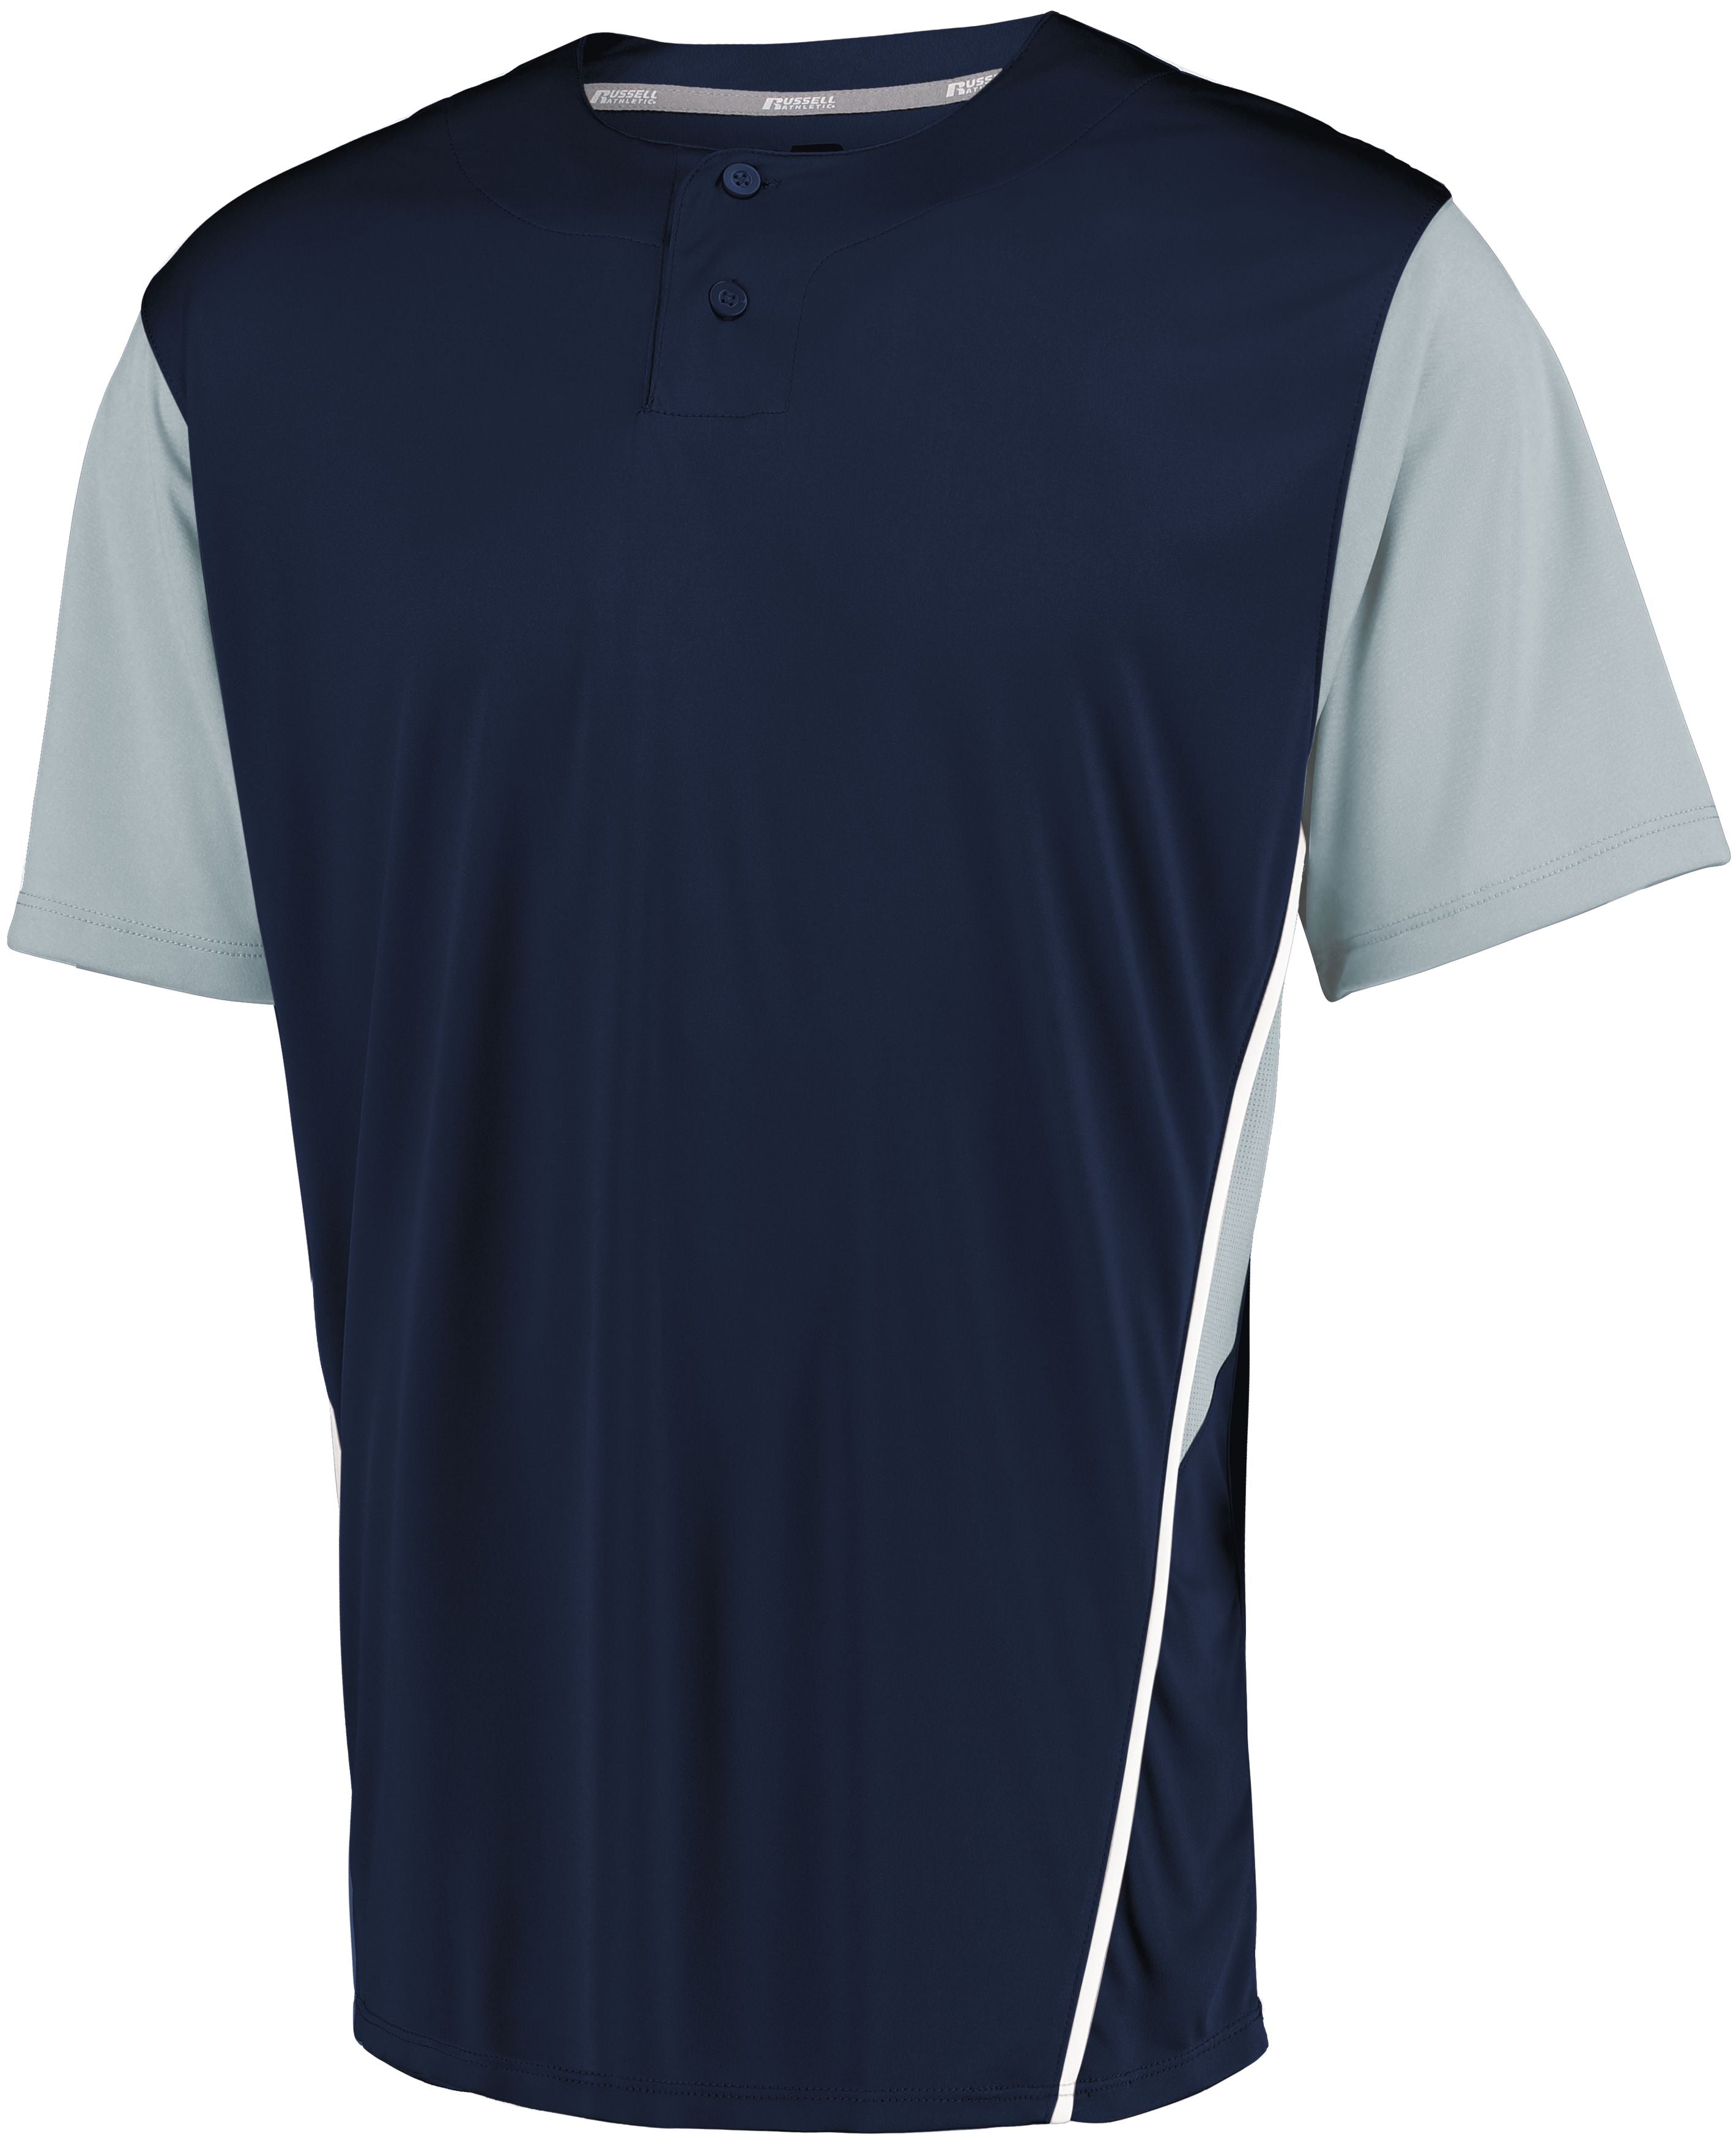 Russell Athletic Youth Two-Button Placket Jersey in Navy/Baseball Grey  -Part of the Youth, Youth-Jersey, Baseball, Russell-Athletic-Products, Shirts, All-Sports, All-Sports-1 product lines at KanaleyCreations.com